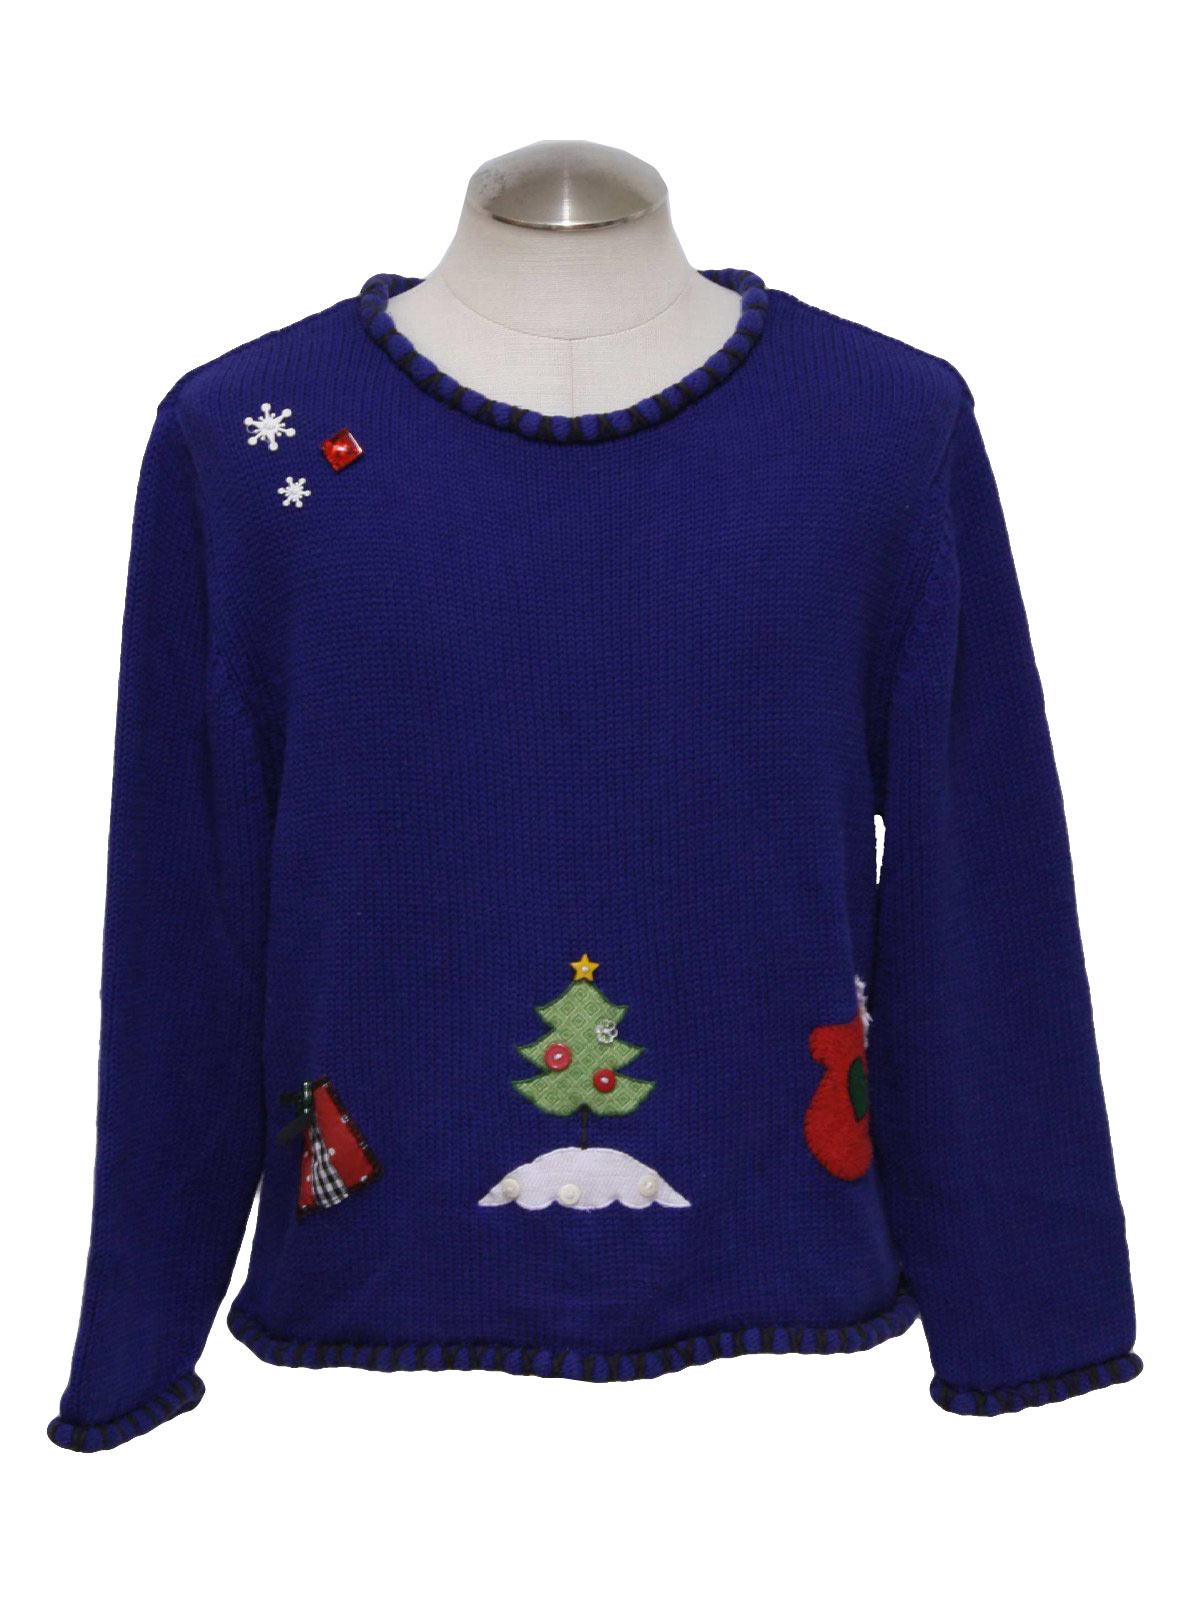 Ugly Christmas Sweater: -Petal bay- Unisex blue background cotton weave ...